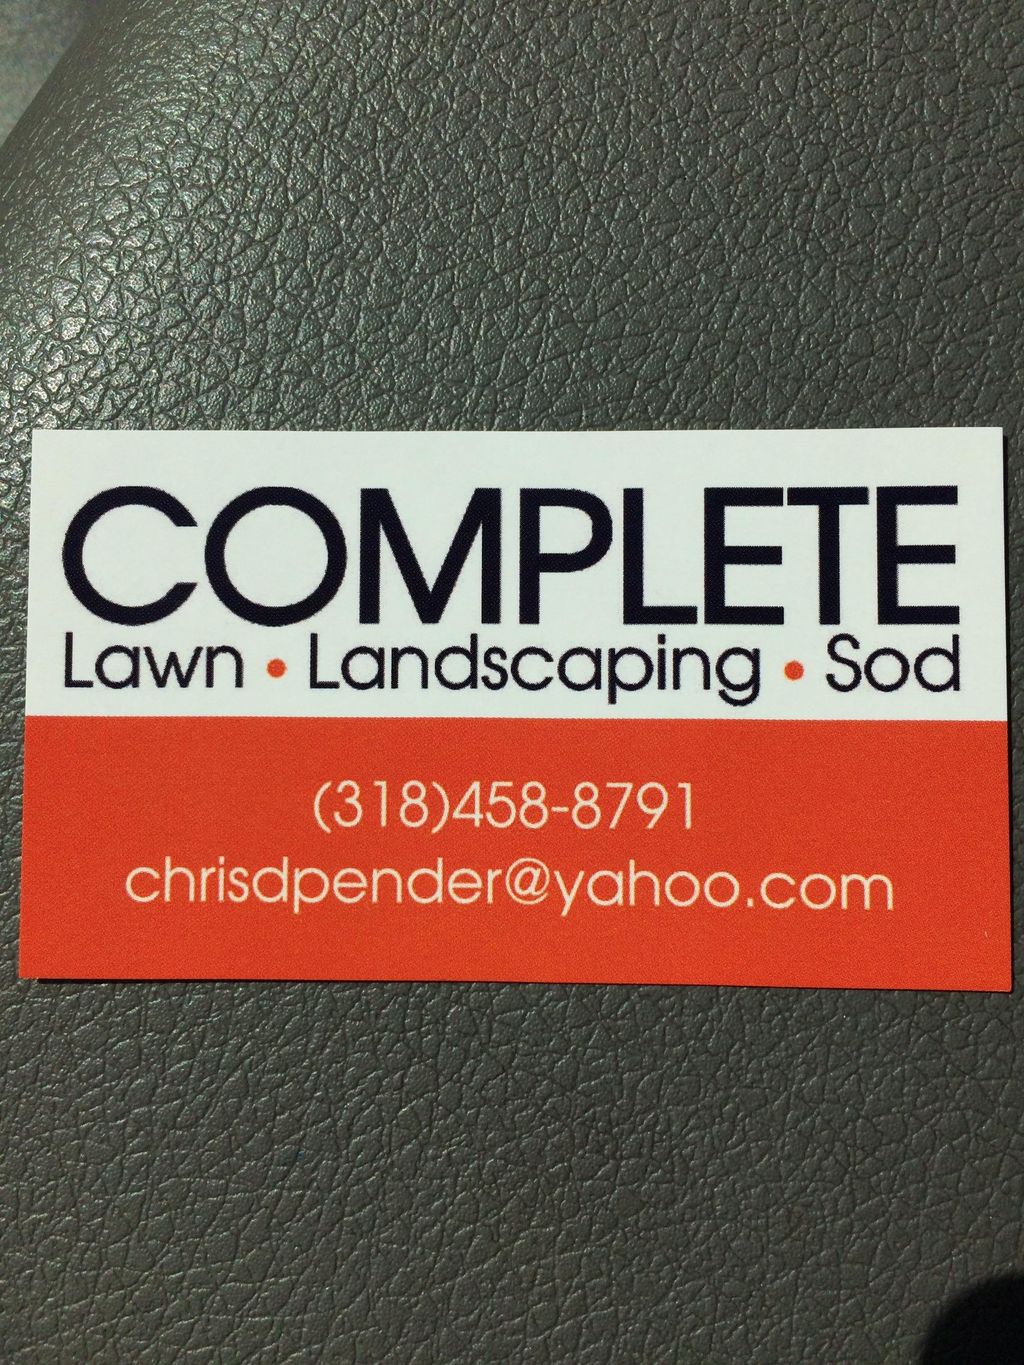 COMPLETE lawn, landscaping, & sod